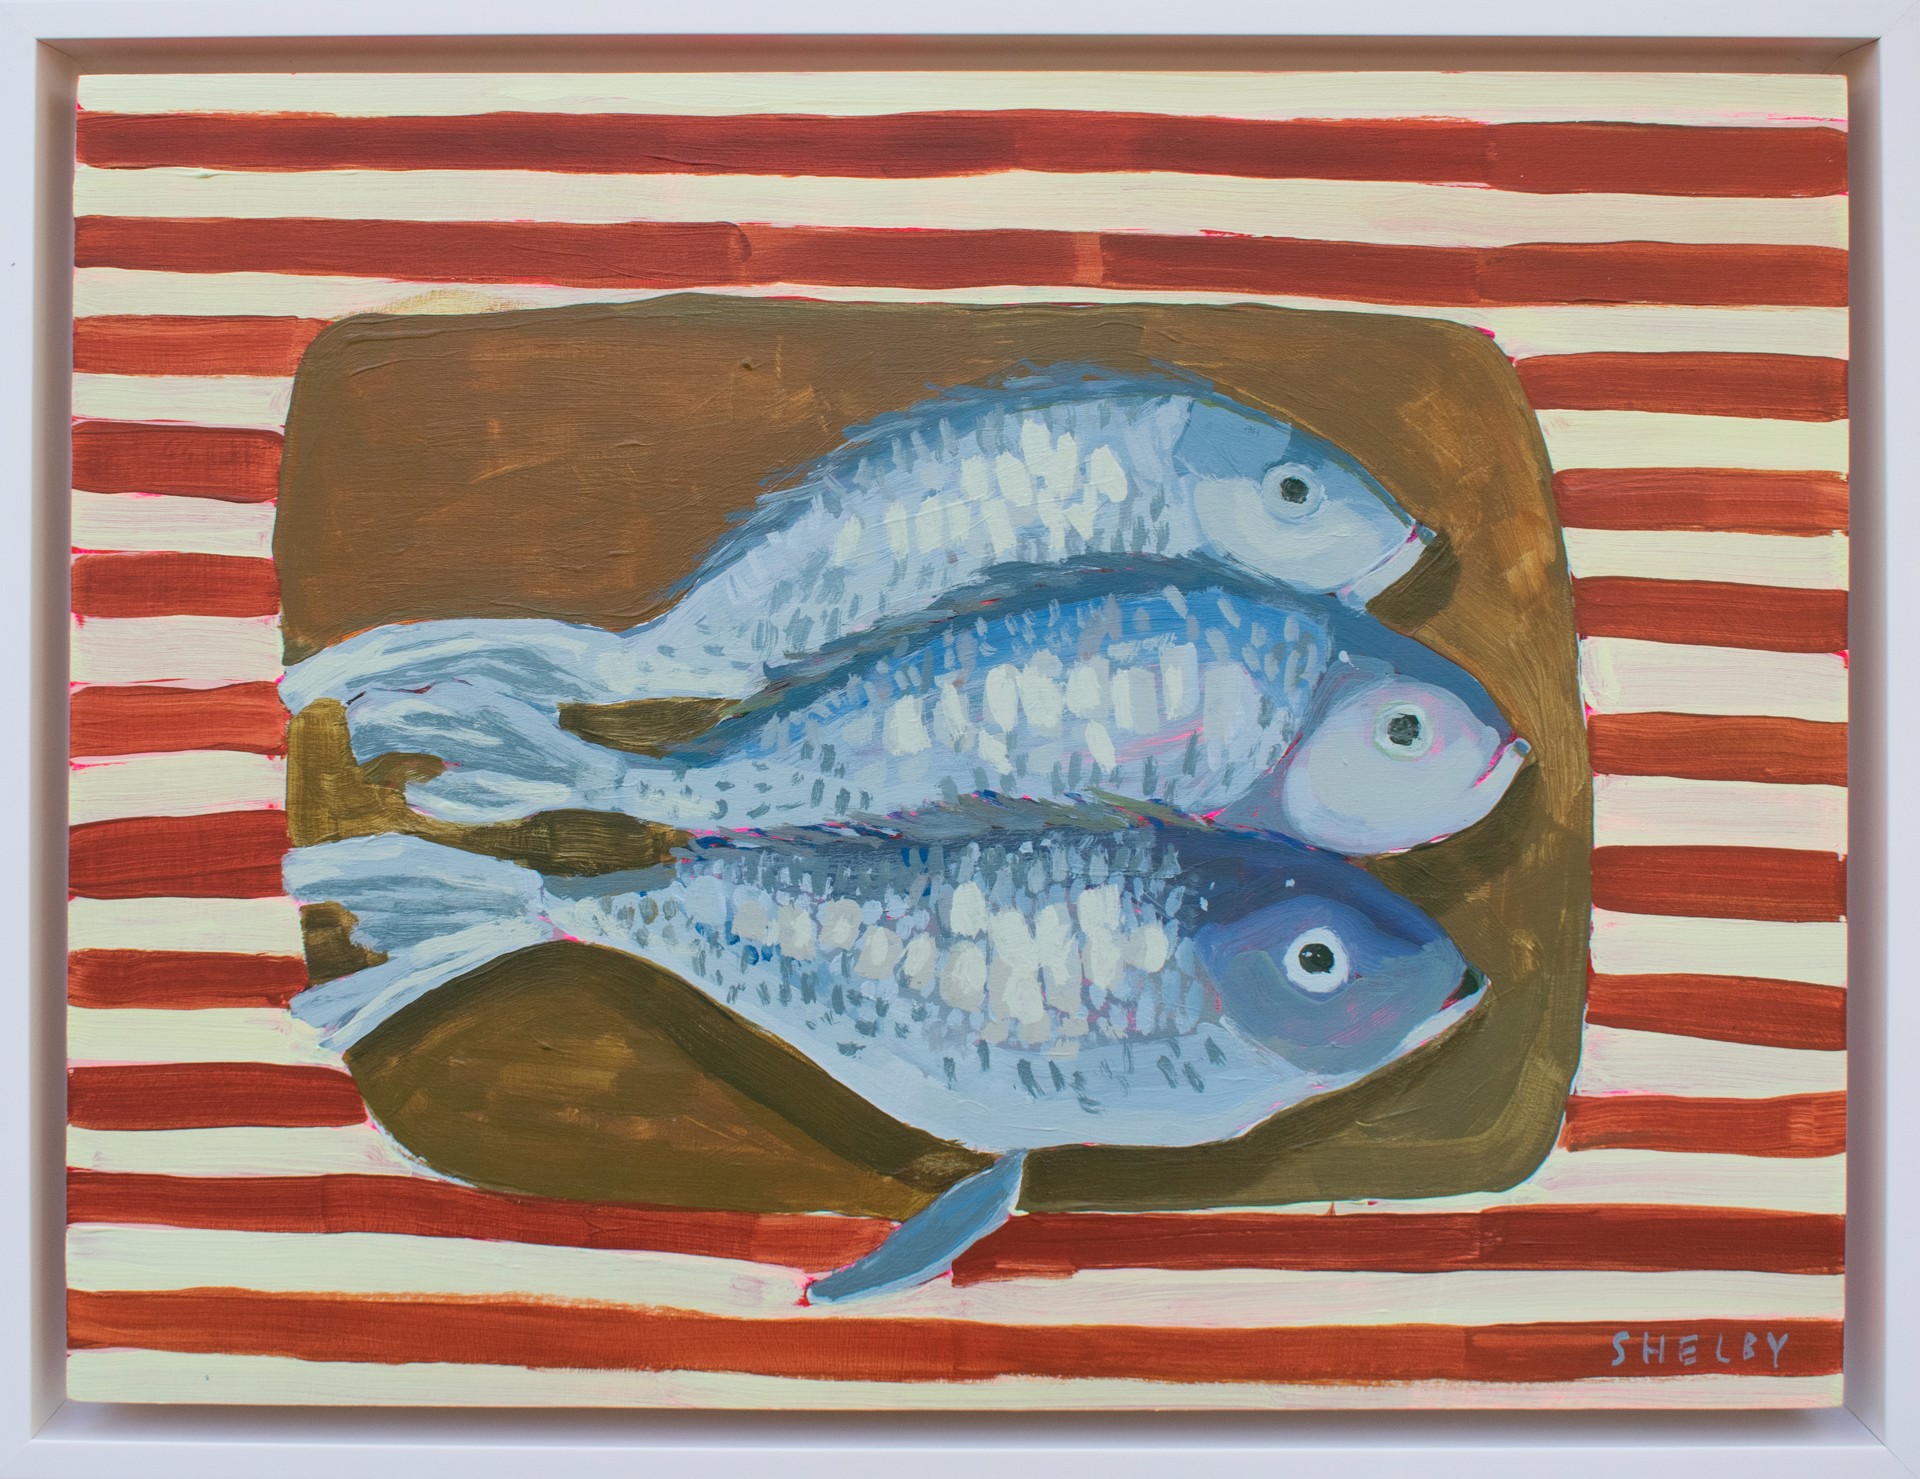 Red Stripes, Blue Fish by Shelby Monteverde